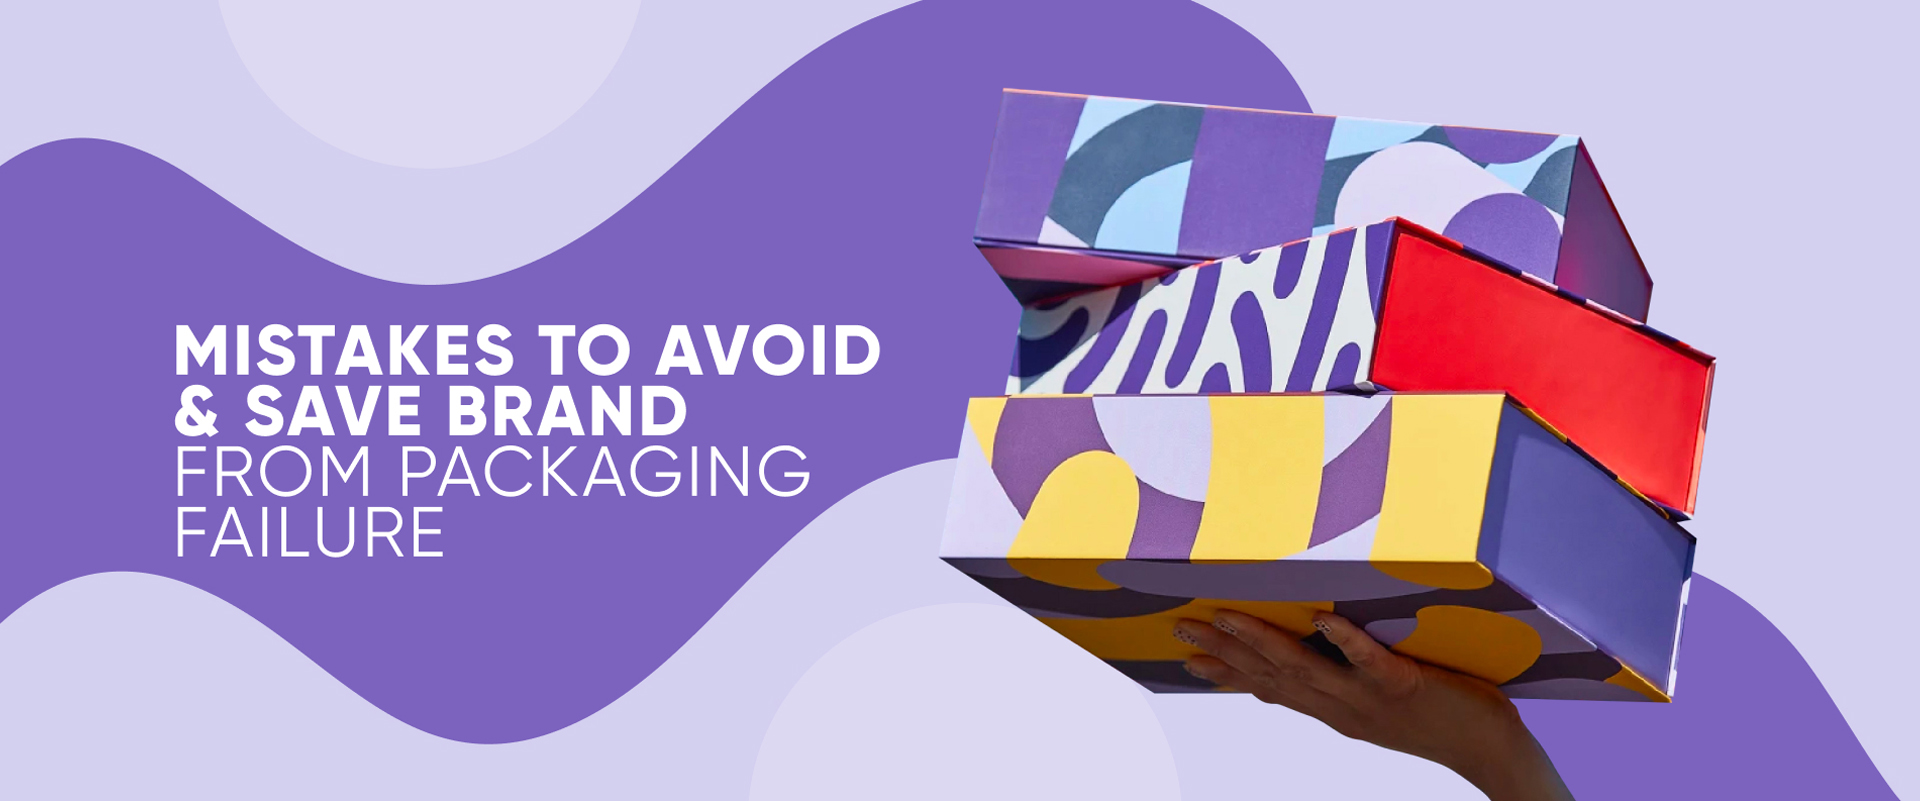 Mistakes To Avoid & Save Brand From Packaging Failure